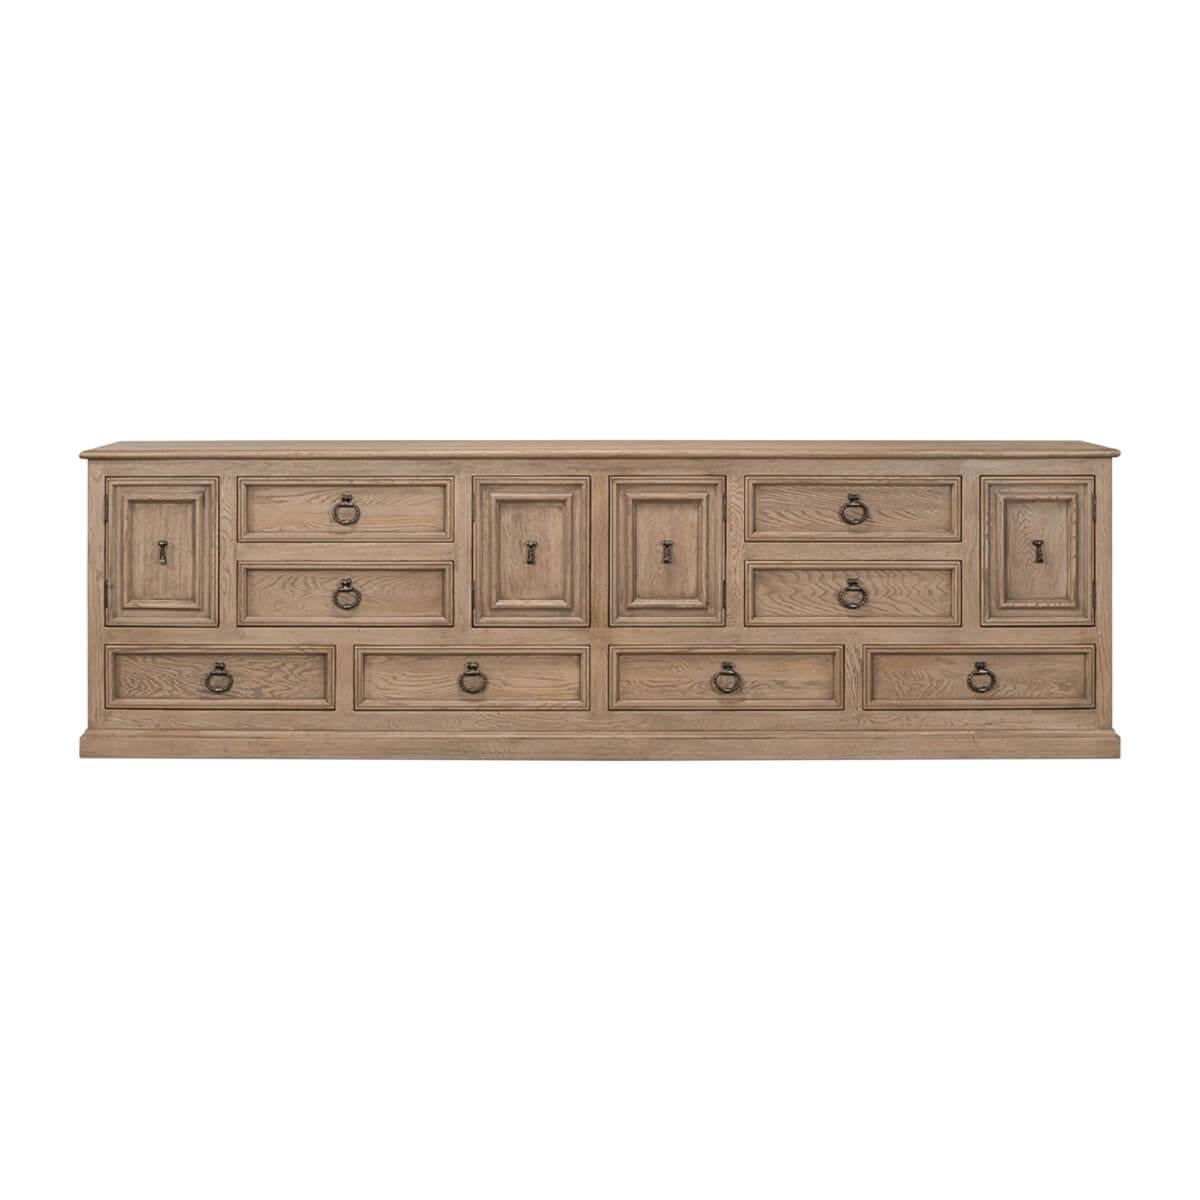 Expertly crafted with a keen eye for detail, this piece showcases the ornate aesthetic characteristic of the Baroque period, featuring bold geometric carvings and finished in the barn gray.

With multiple drawers and cupboards, the credenza has